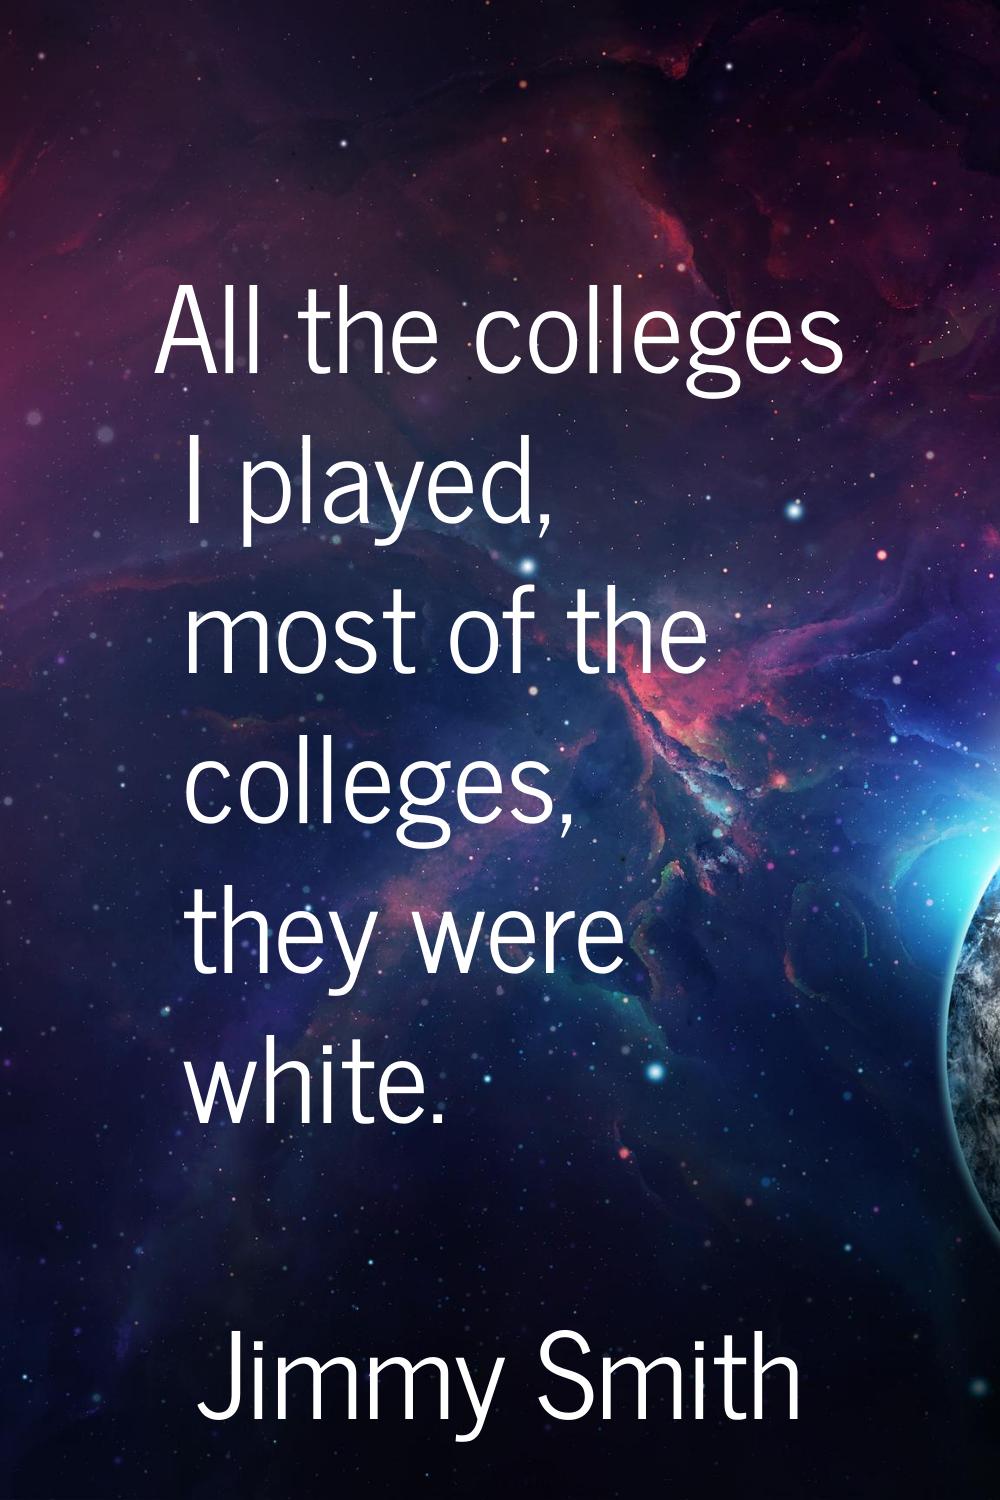 All the colleges I played, most of the colleges, they were white.